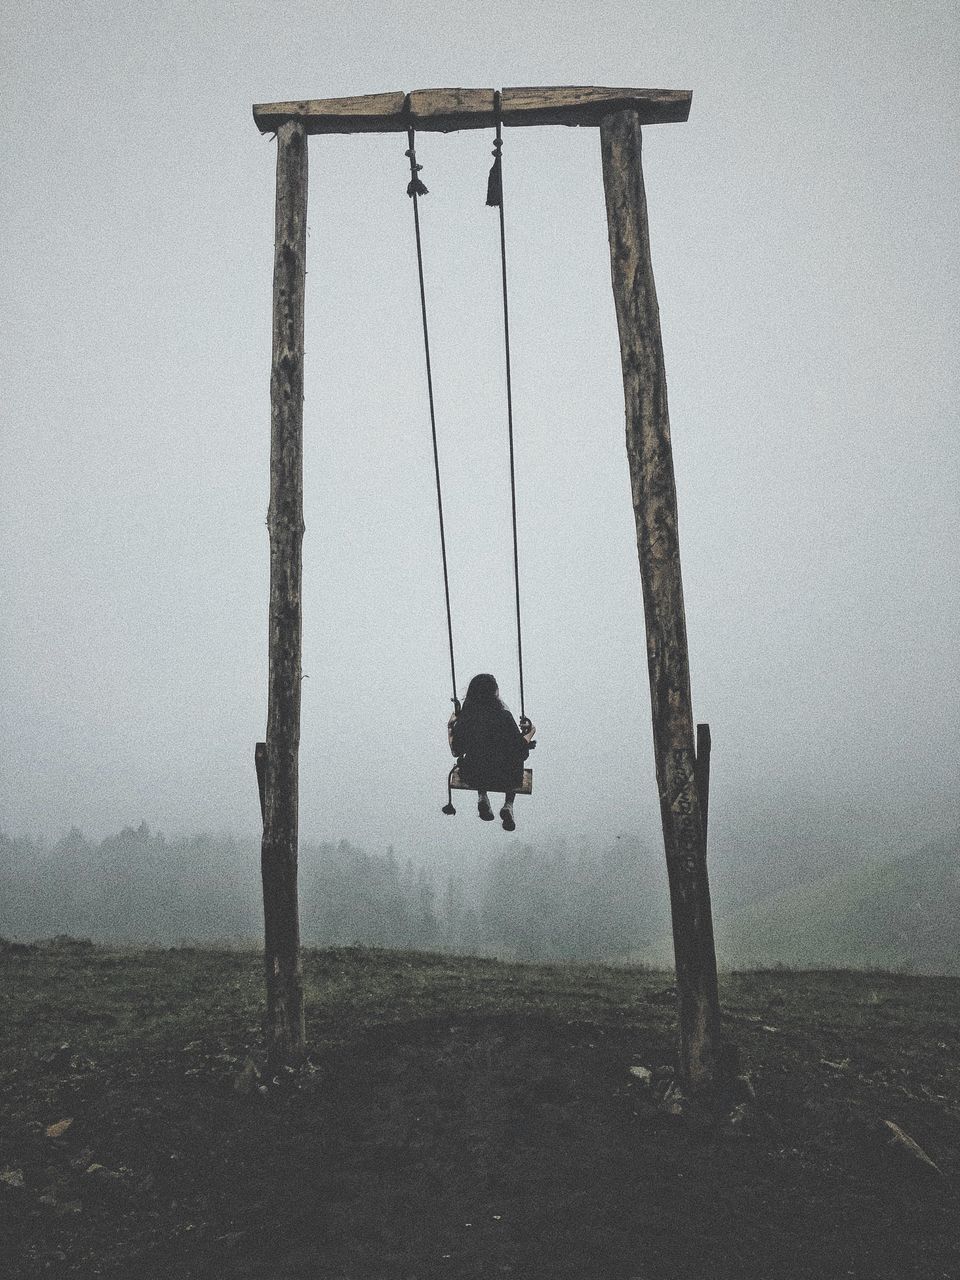 real people, sky, fog, one person, nature, land, day, full length, lifestyles, leisure activity, landscape, outdoors, field, men, hanging, environment, silhouette